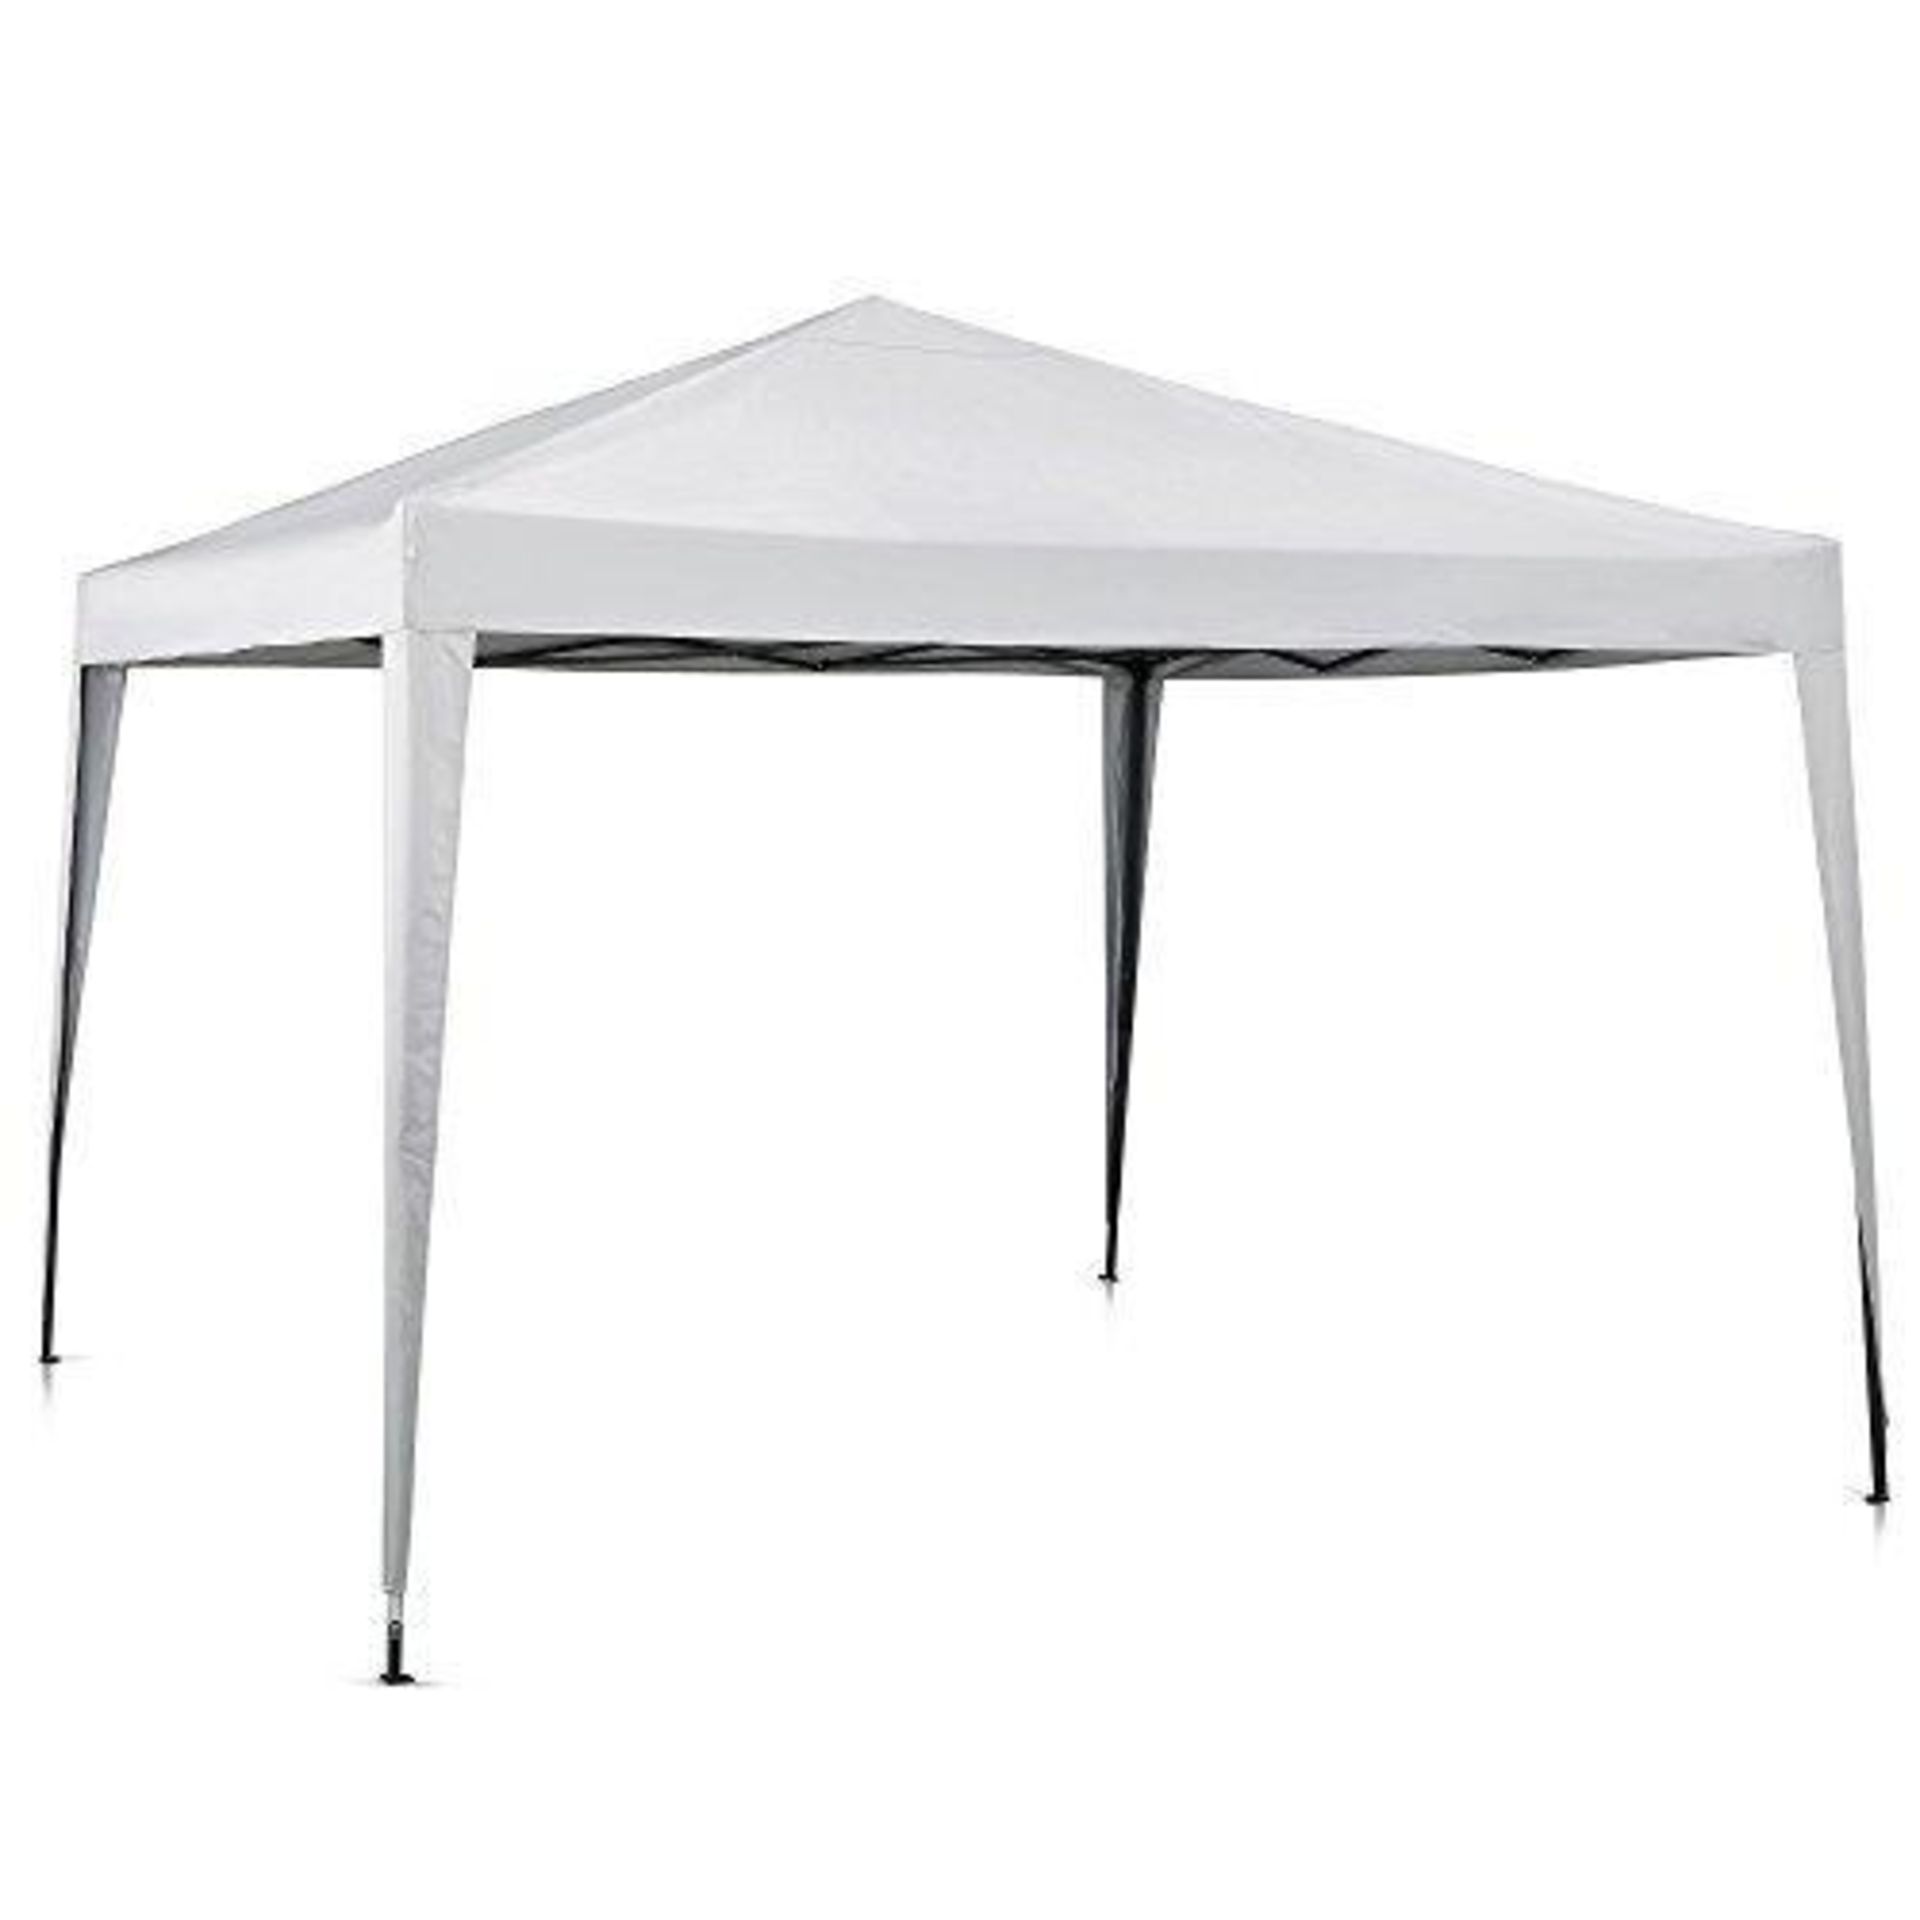 Ivory Pop-up Gazebo Set 3 X 3m Ivory Pop-up Gazebo with WeightsTransform your garden with our 3 x 3m